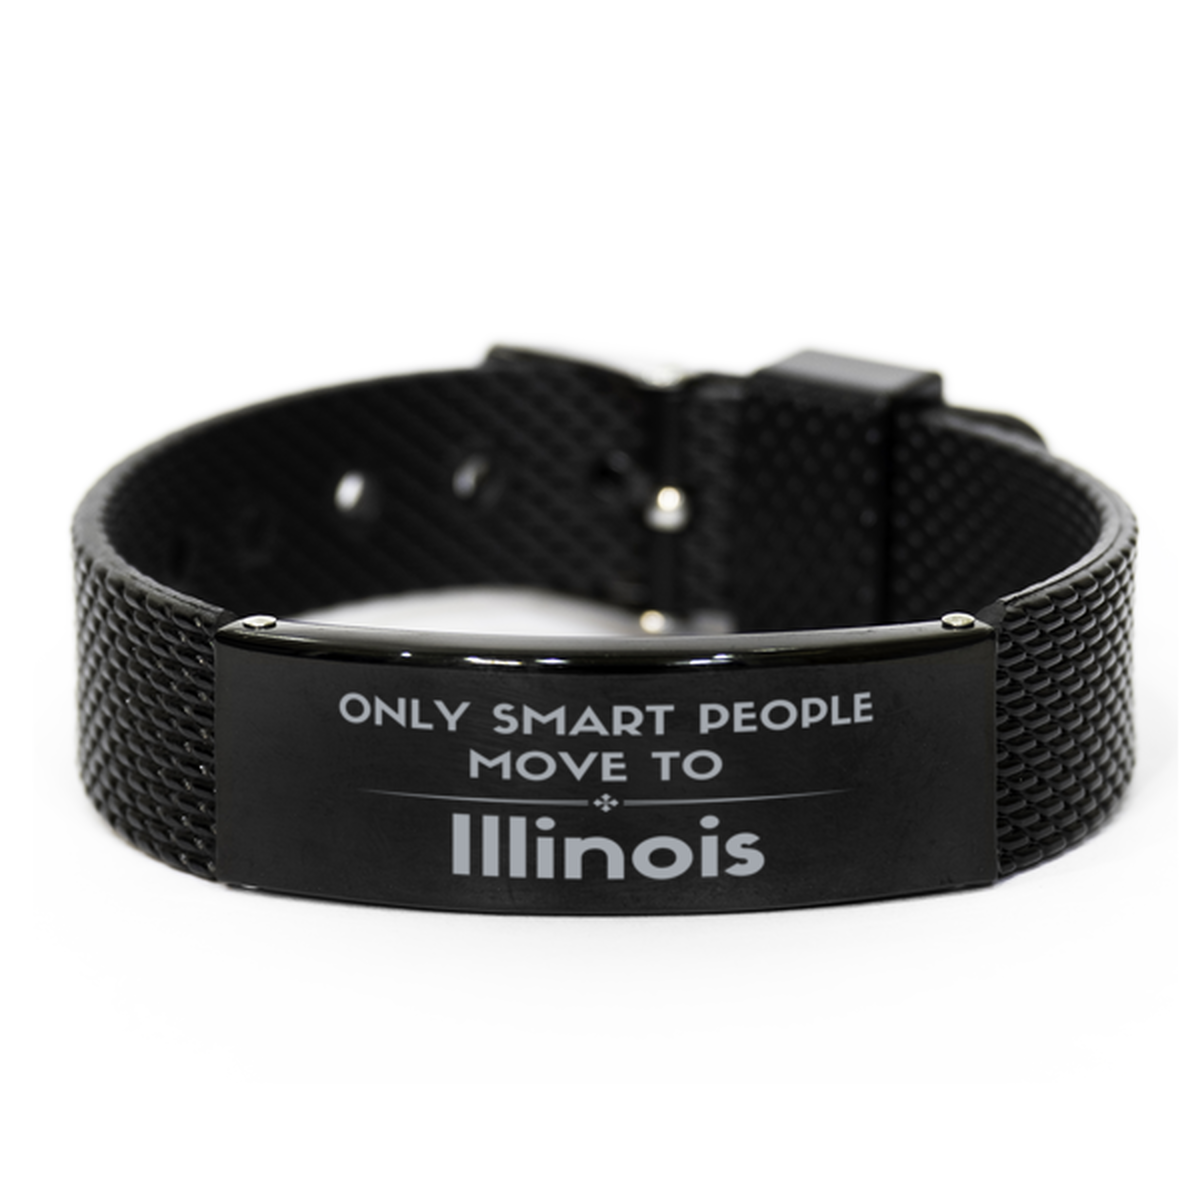 Only smart people move to Illinois Black Shark Mesh Bracelet, Gag Gifts For Illinois, Move to Illinois Gifts for Friends Coworker Funny Saying Quote